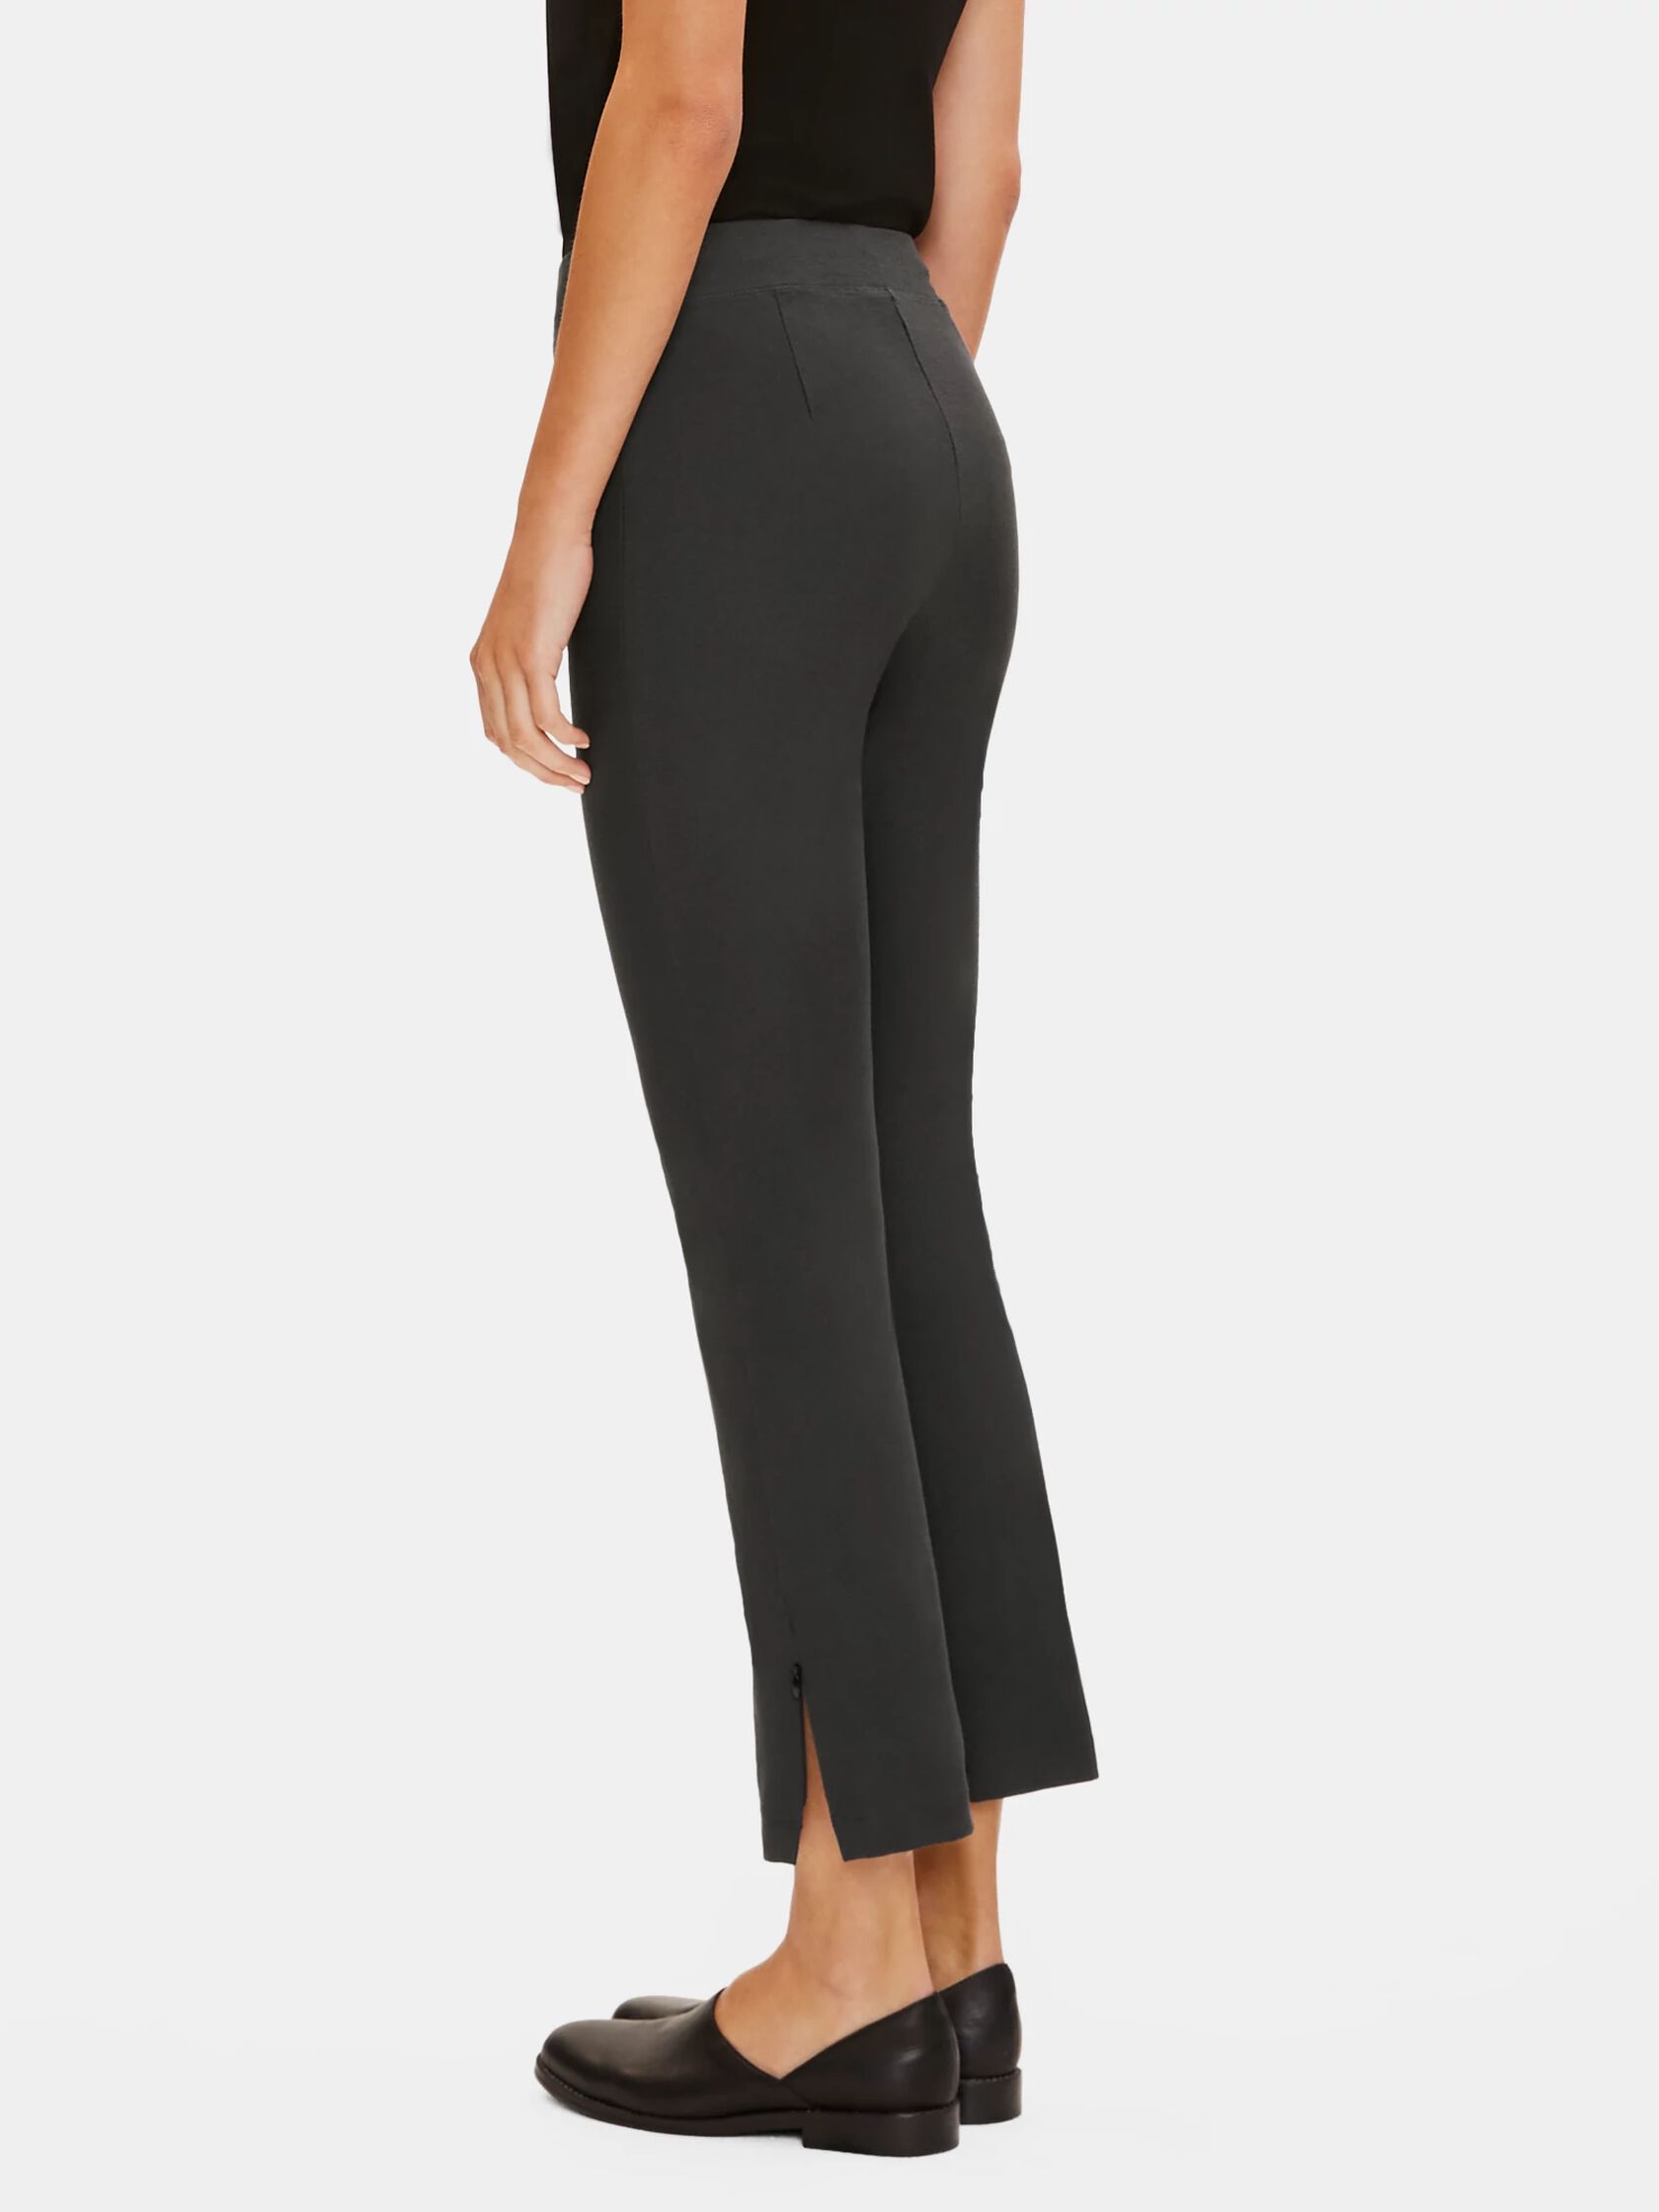 Washable Stretch Crepe Slim Ankle Pant with Zipper Slits | EILEEN FISHER